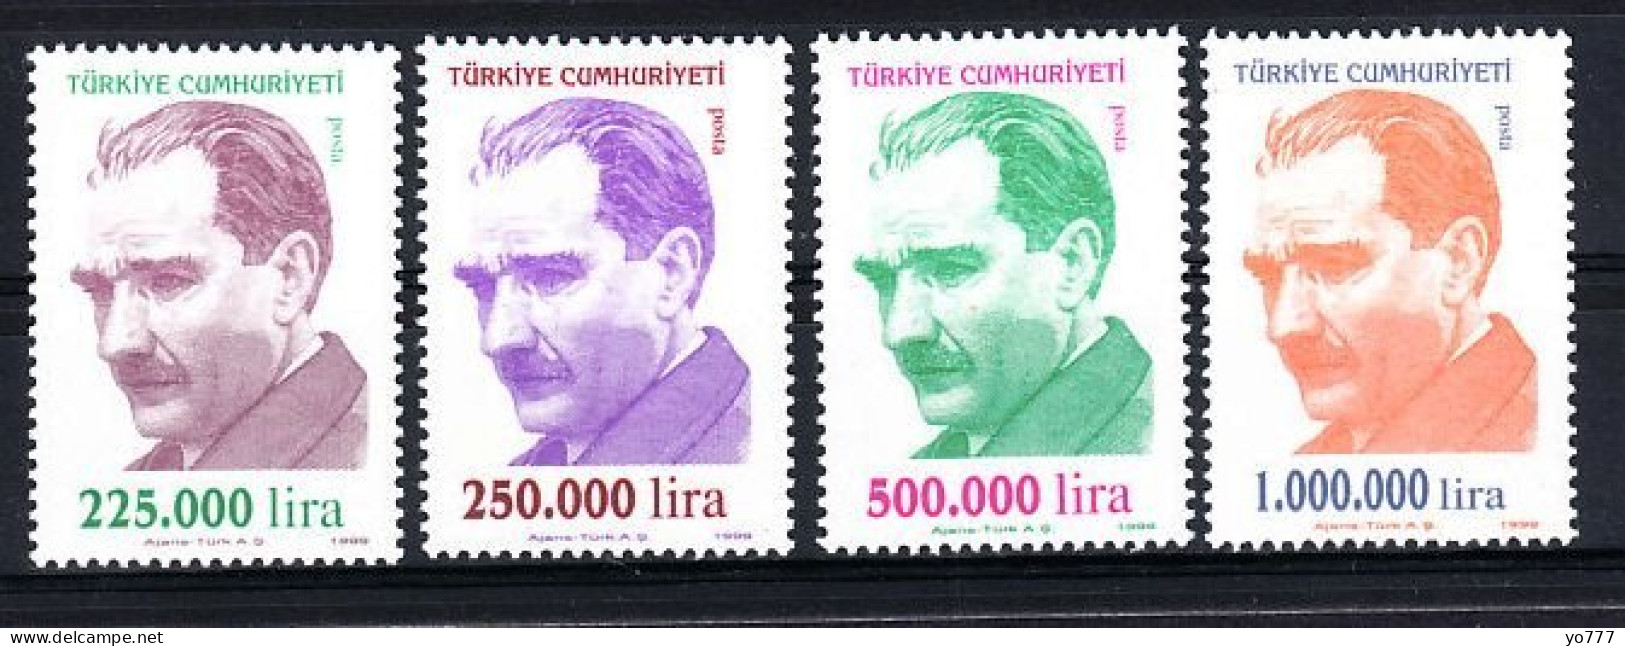 (3197-00) TURKEY REGULAR ISSUE STAMPS WITH THE PORTRAIT OF ATATURK MNH** - Neufs